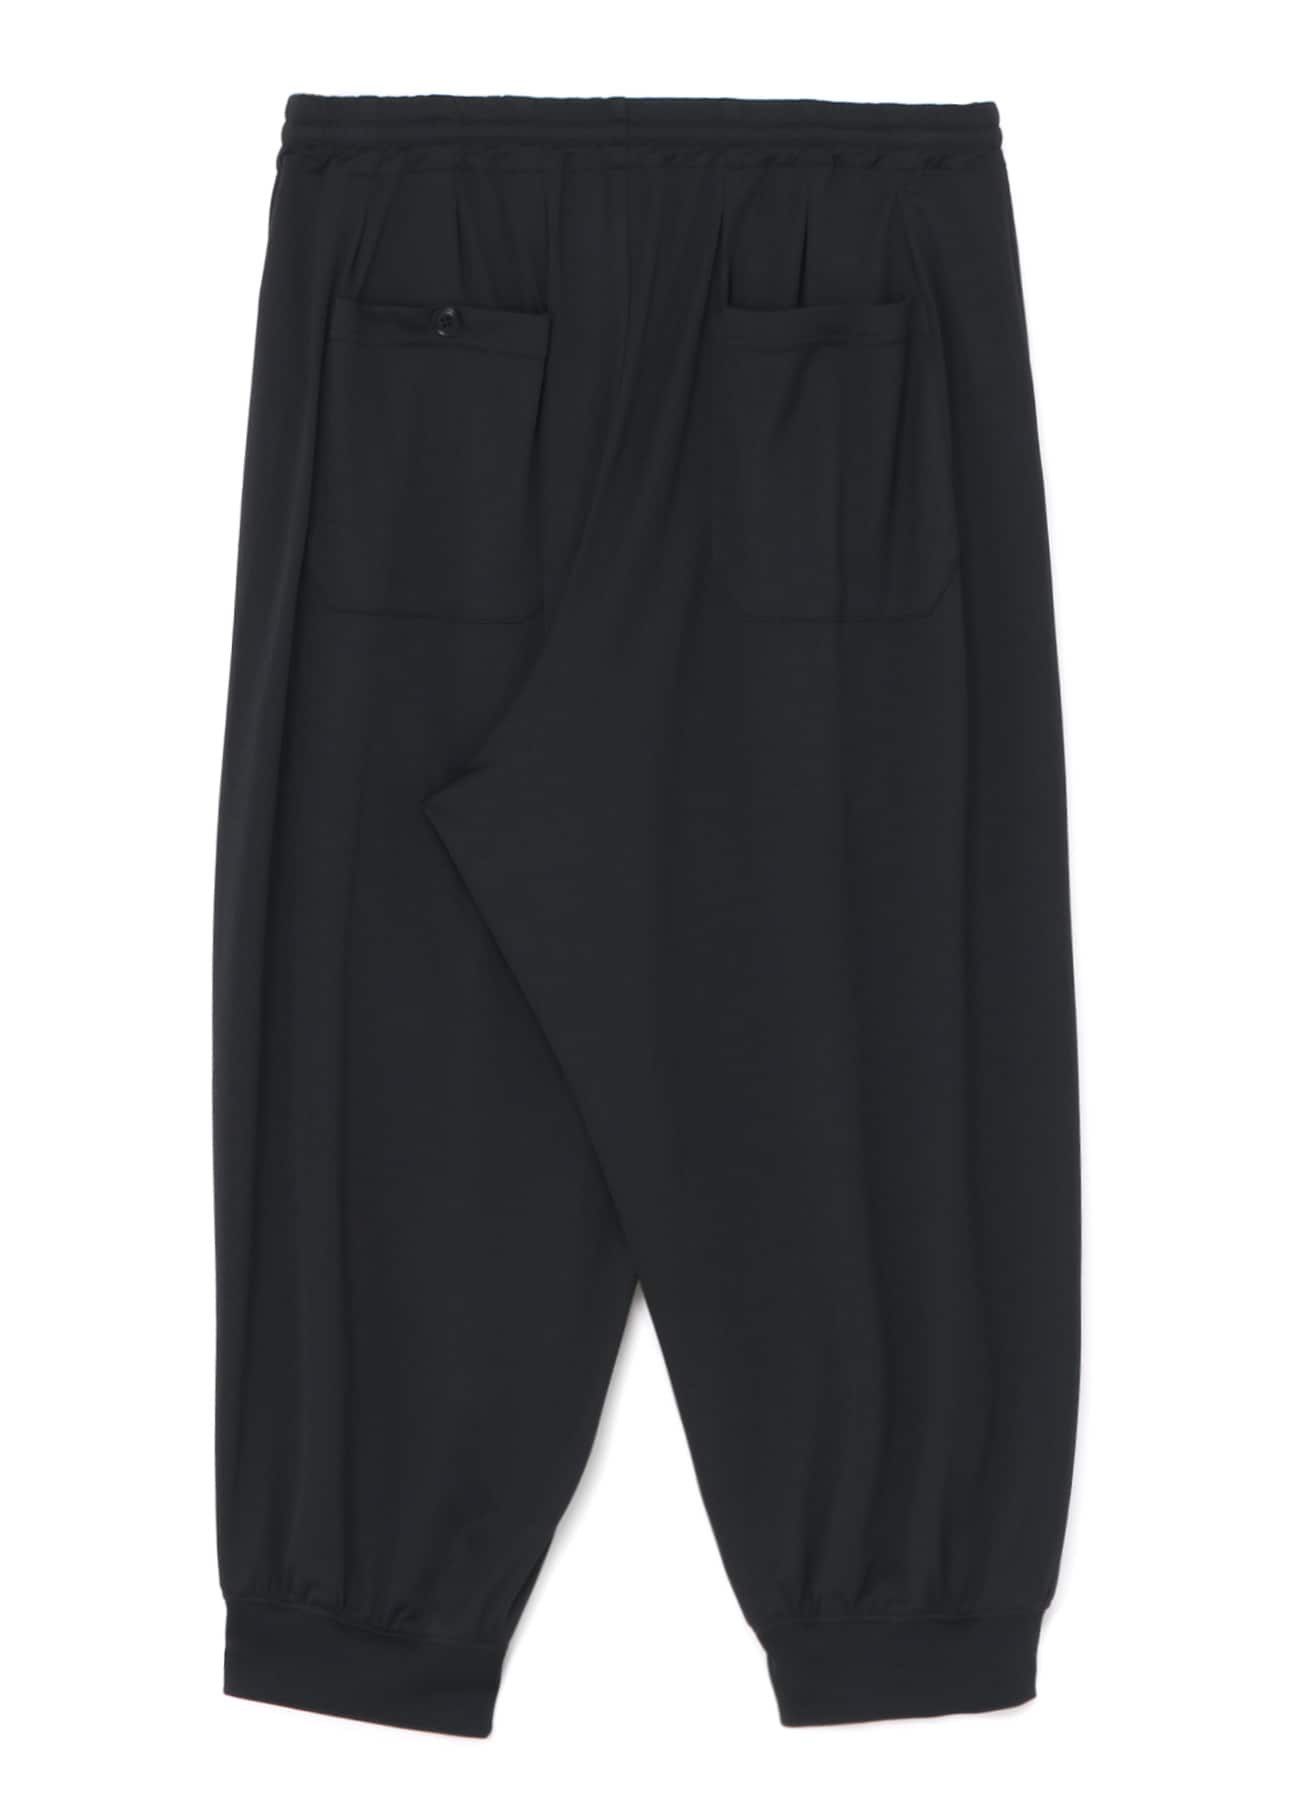 HIGH-GAUGE POLYESTER SMOOTH JERSEY PANTS WITH RIBBED HEMS(M Black